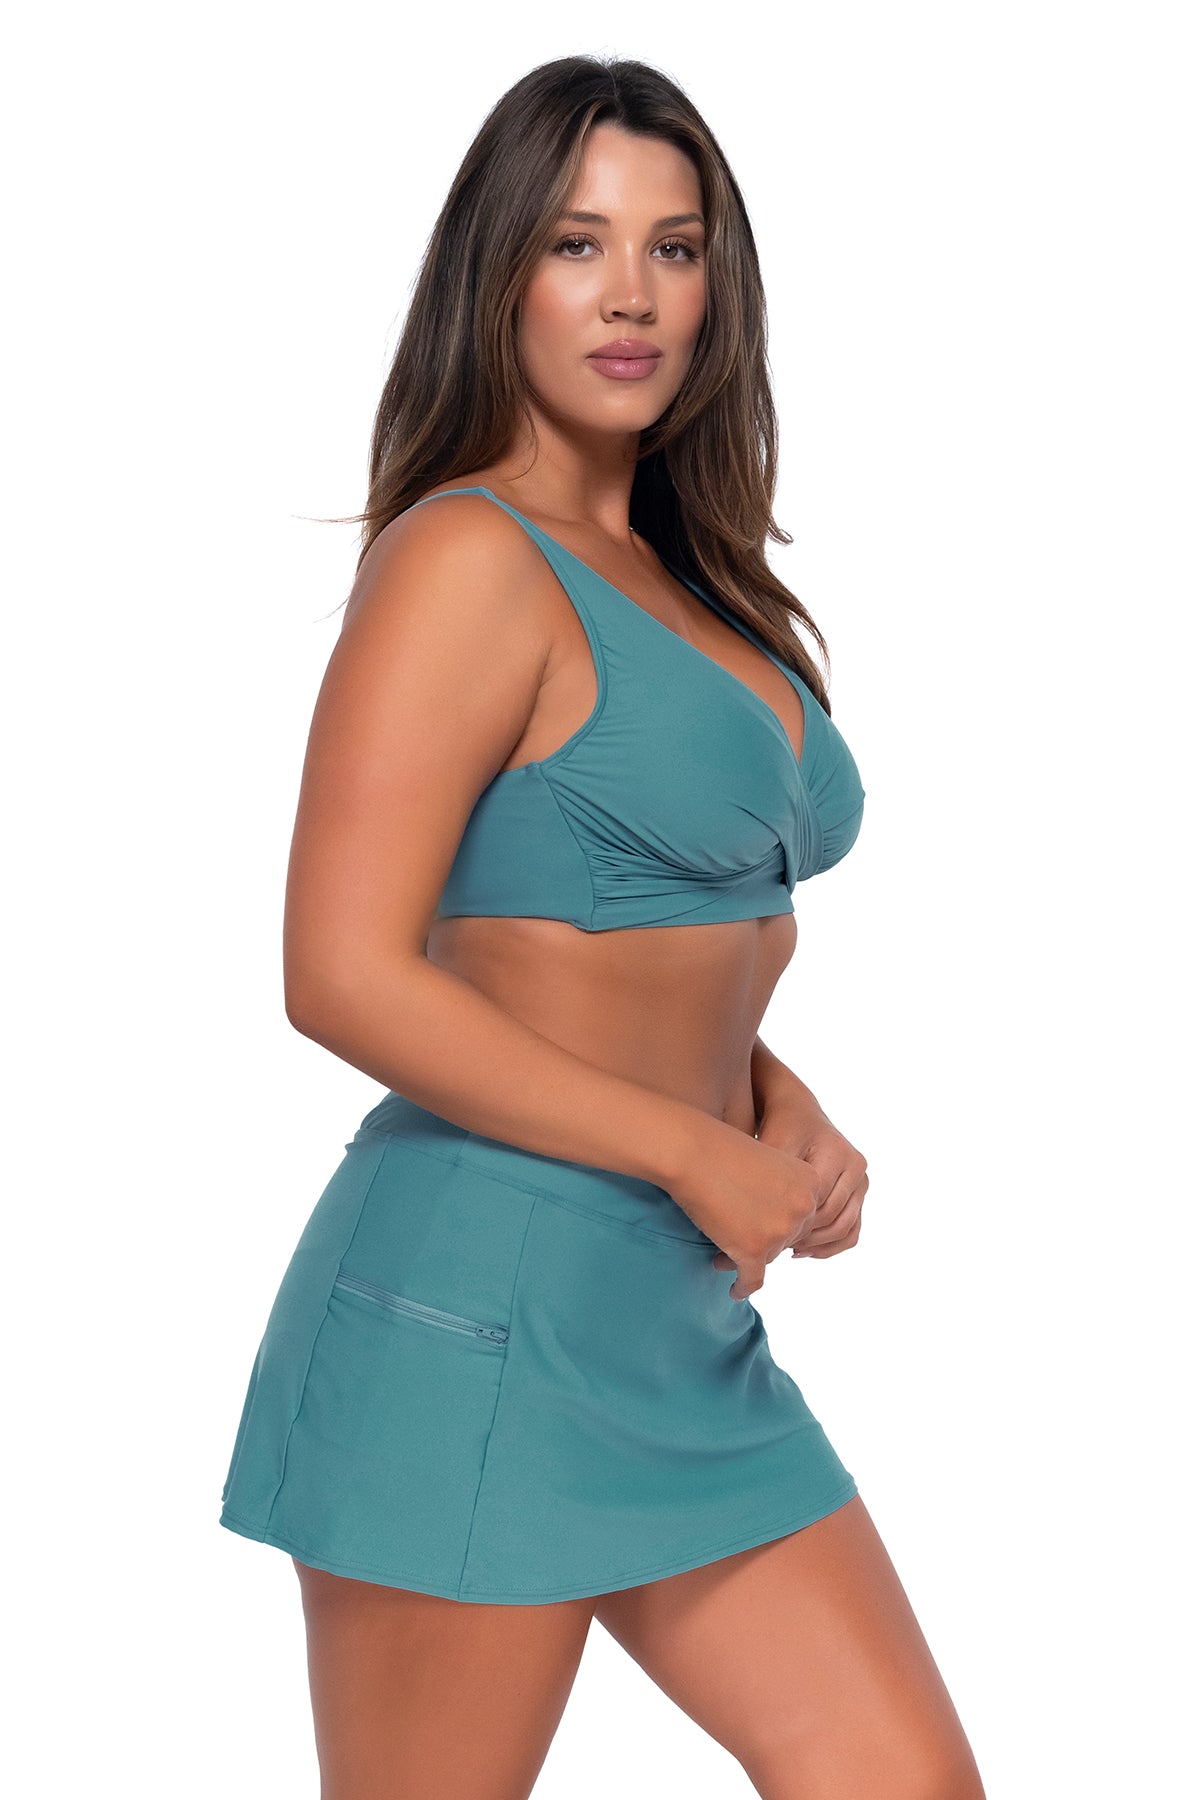 Side pose #1 of Nicky wearing Sunsets Ocean Sporty Swim Skirt with matching Elsie Top underwire bikini